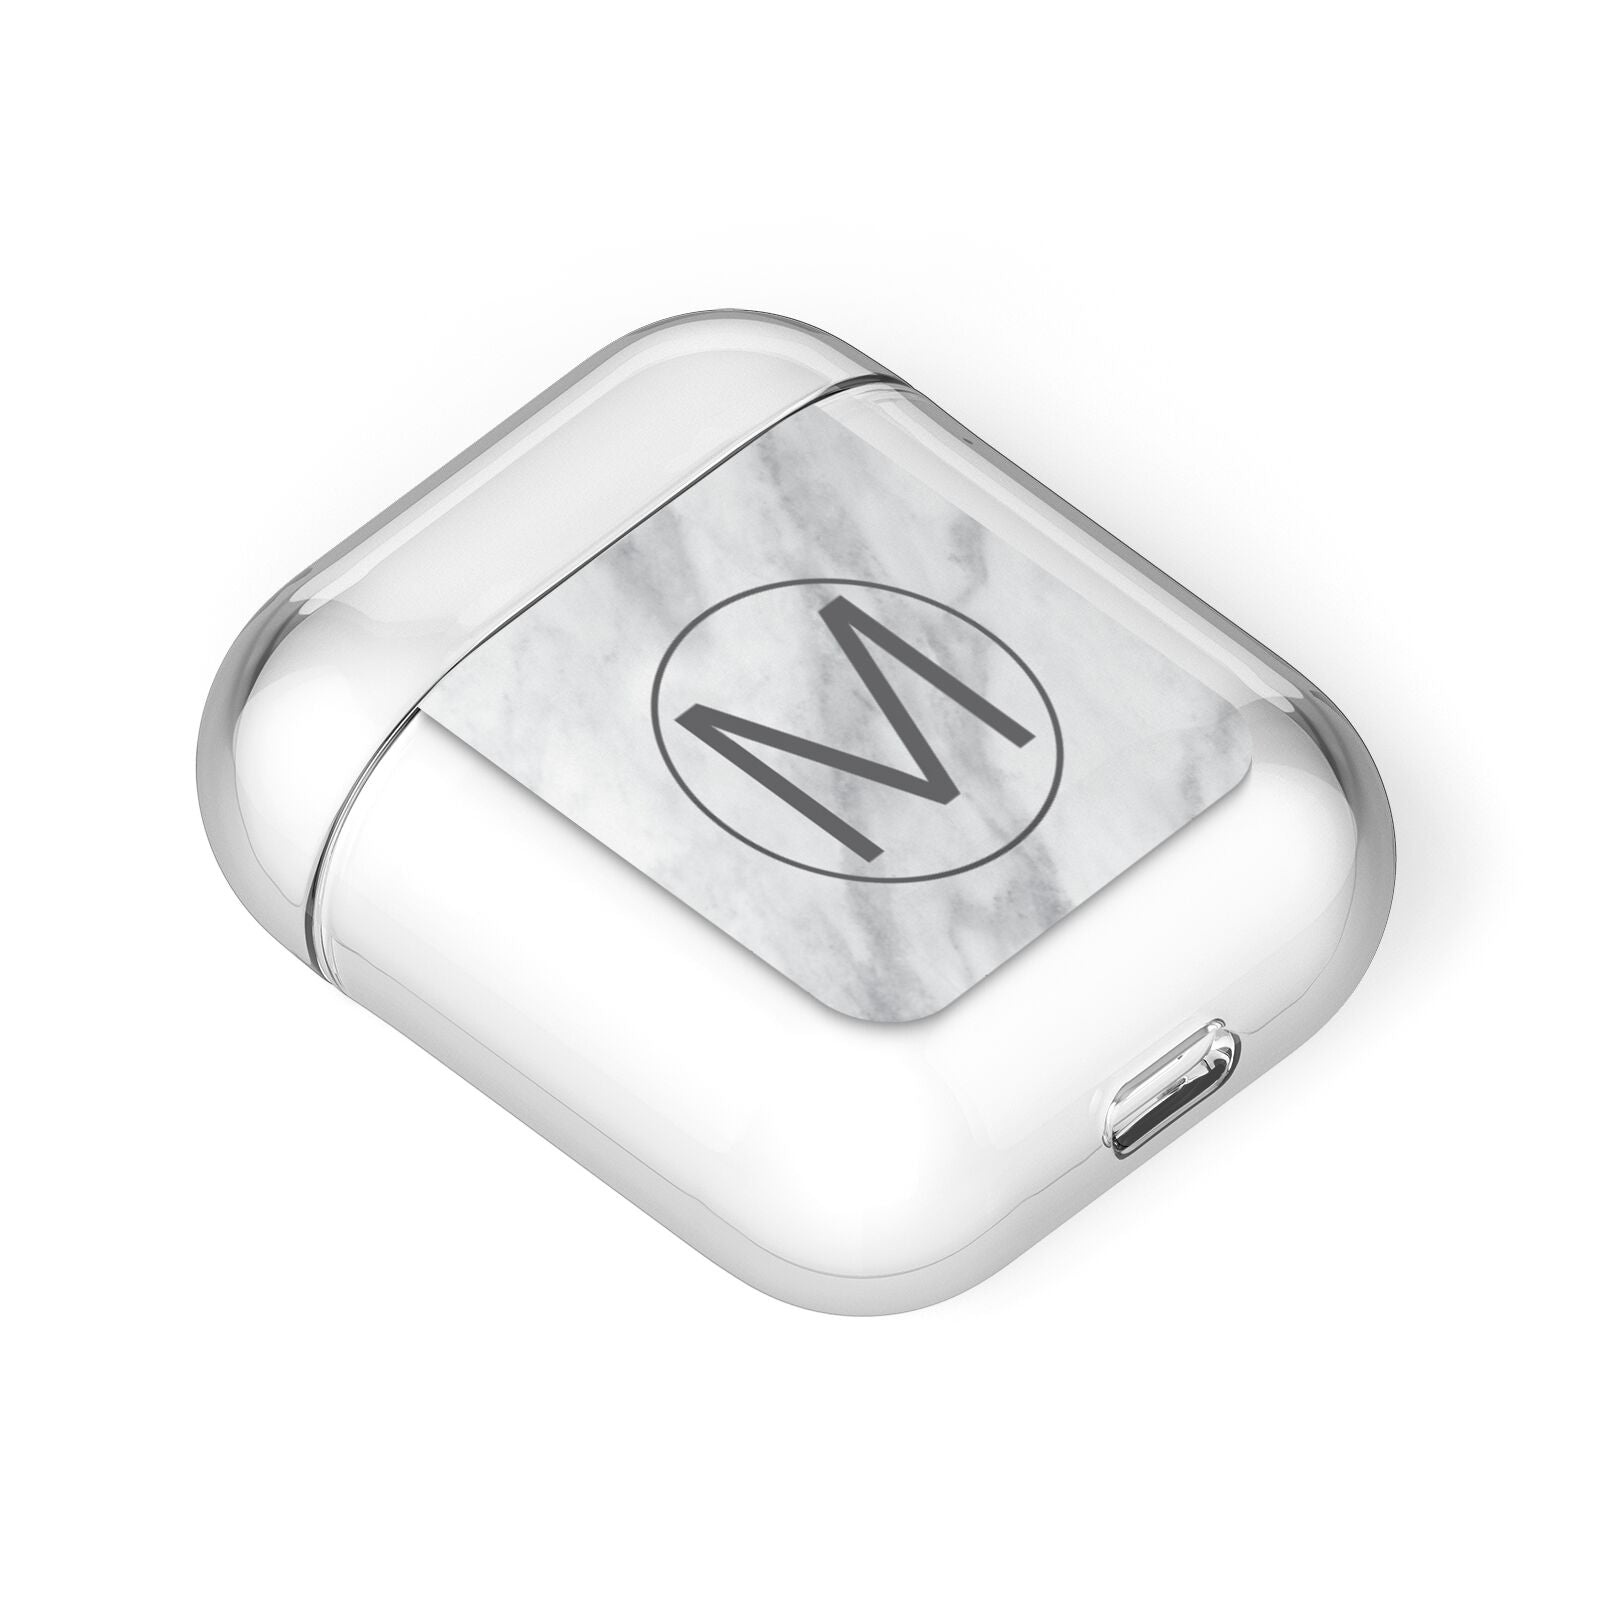 Marble Personalised Initial AirPods Case Laid Flat